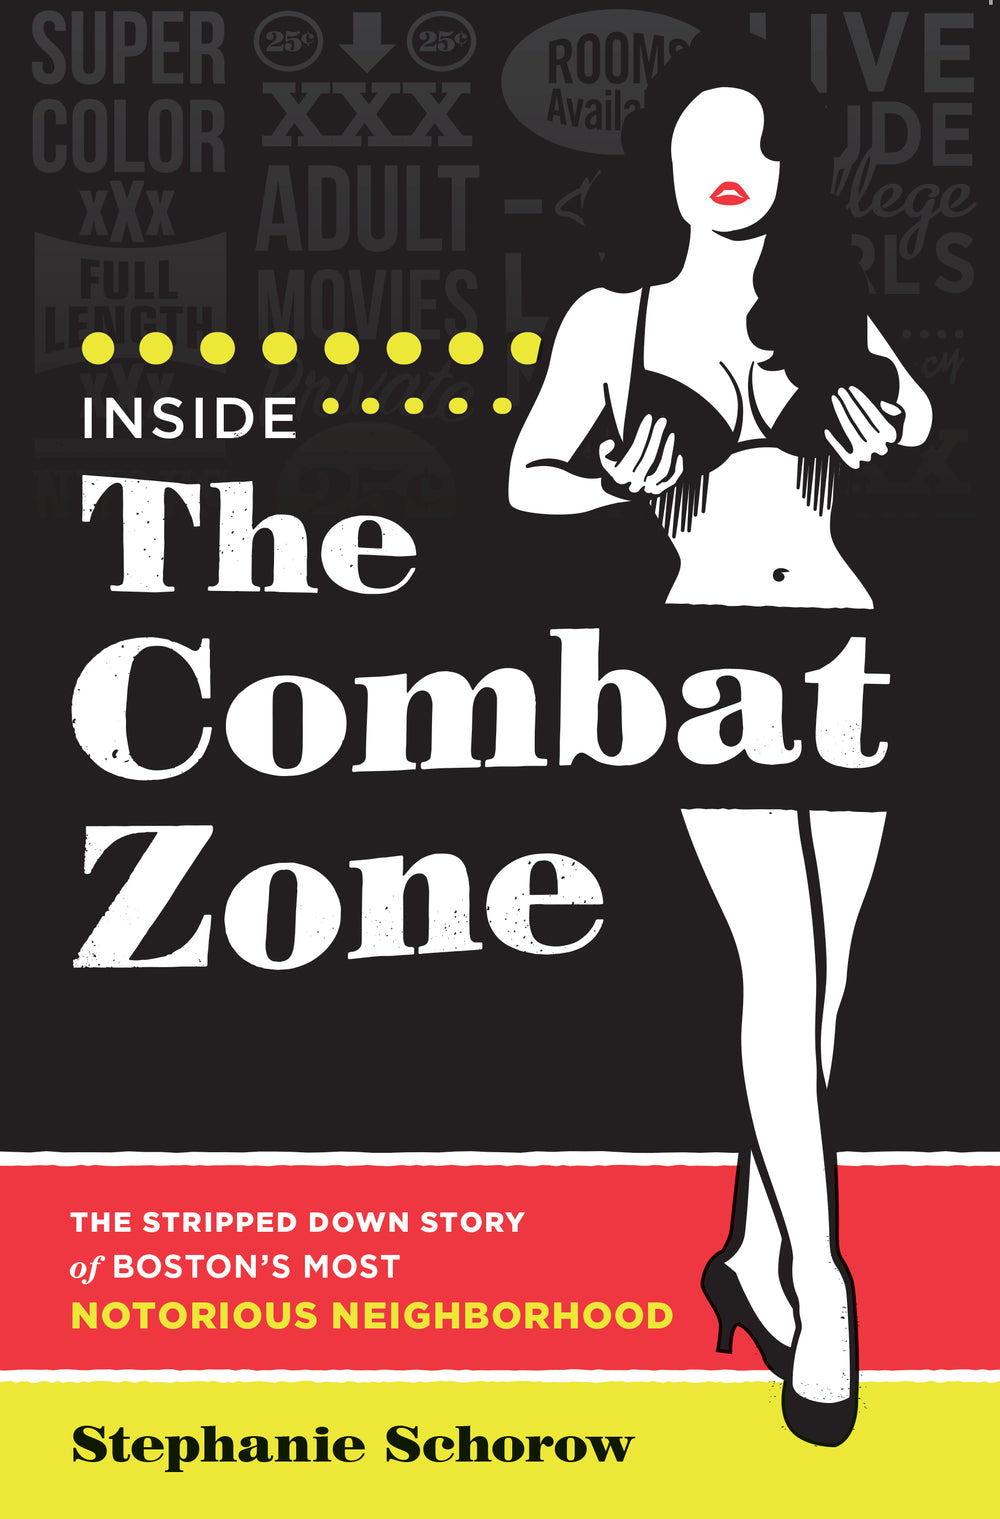 INSIDE THE COMBAT ZONE: THE STRIPPED DOWN STORY OF BOSTON’S MOST NOTORIOUS NEIGHBORHOOD